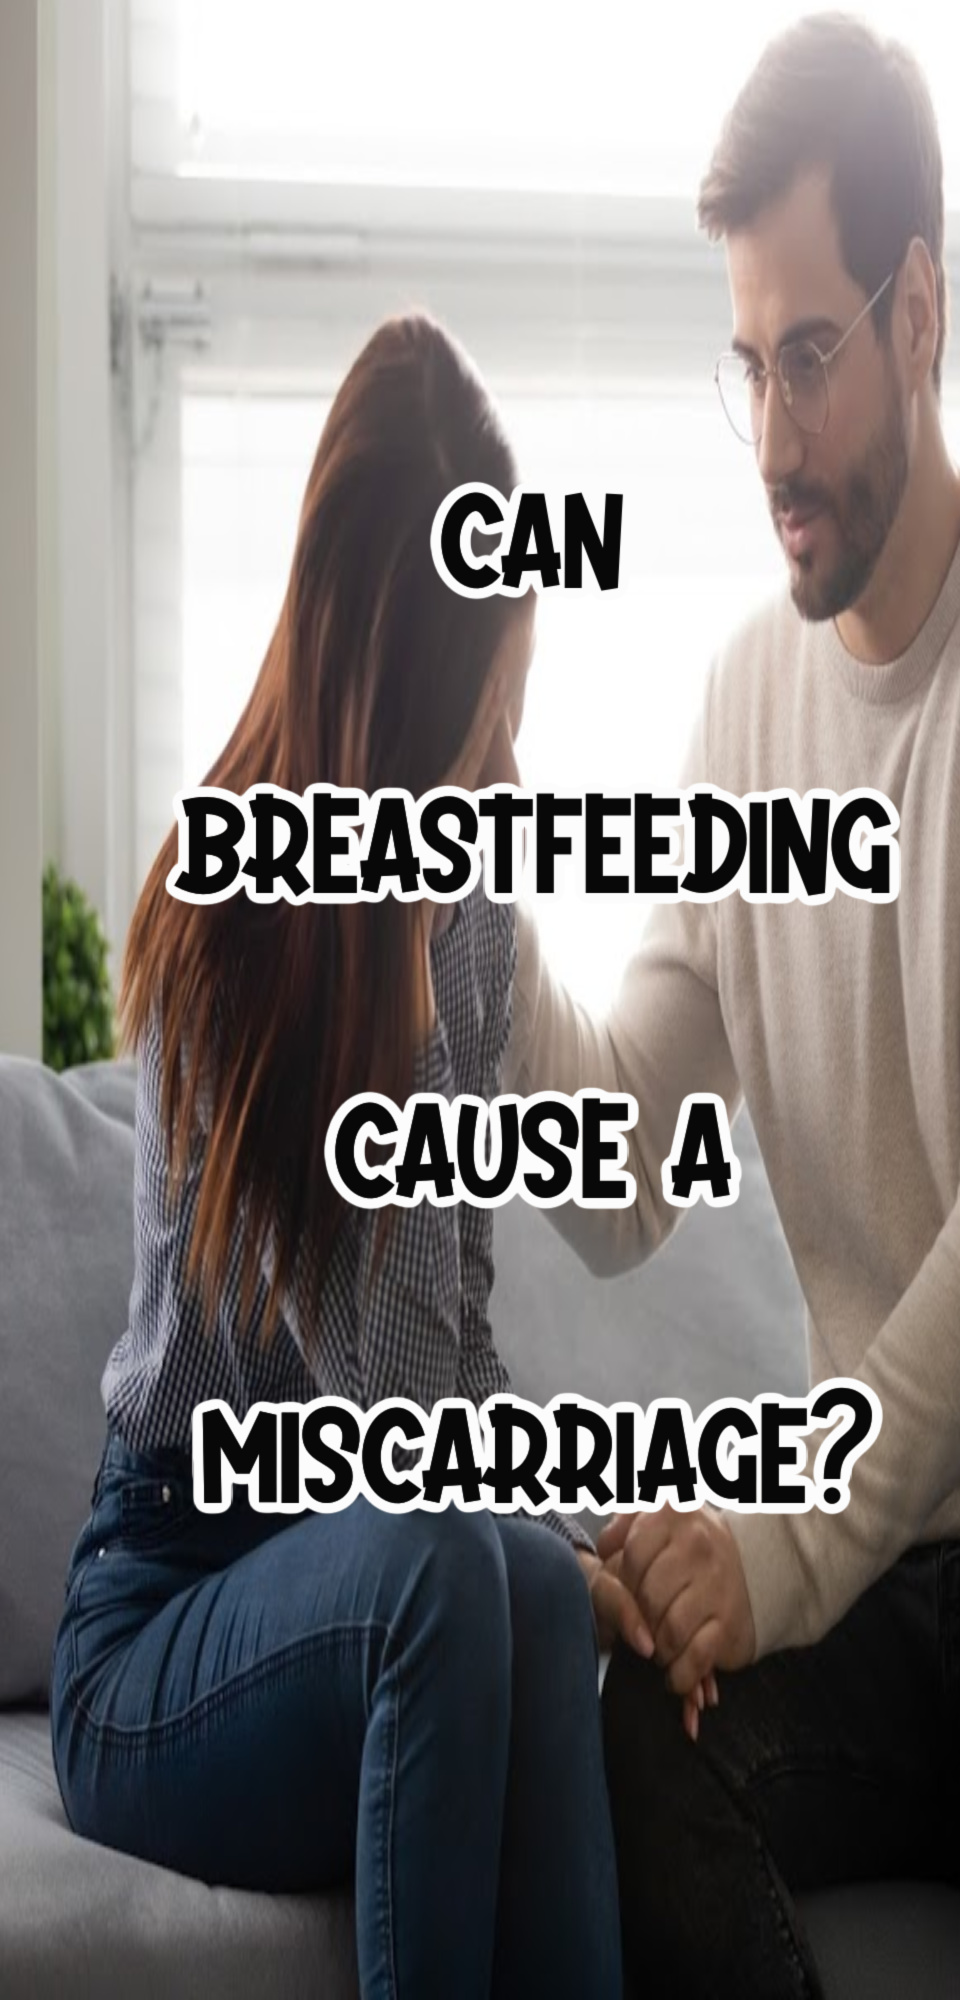 Can Breastfeeding Cause Miscarriage?